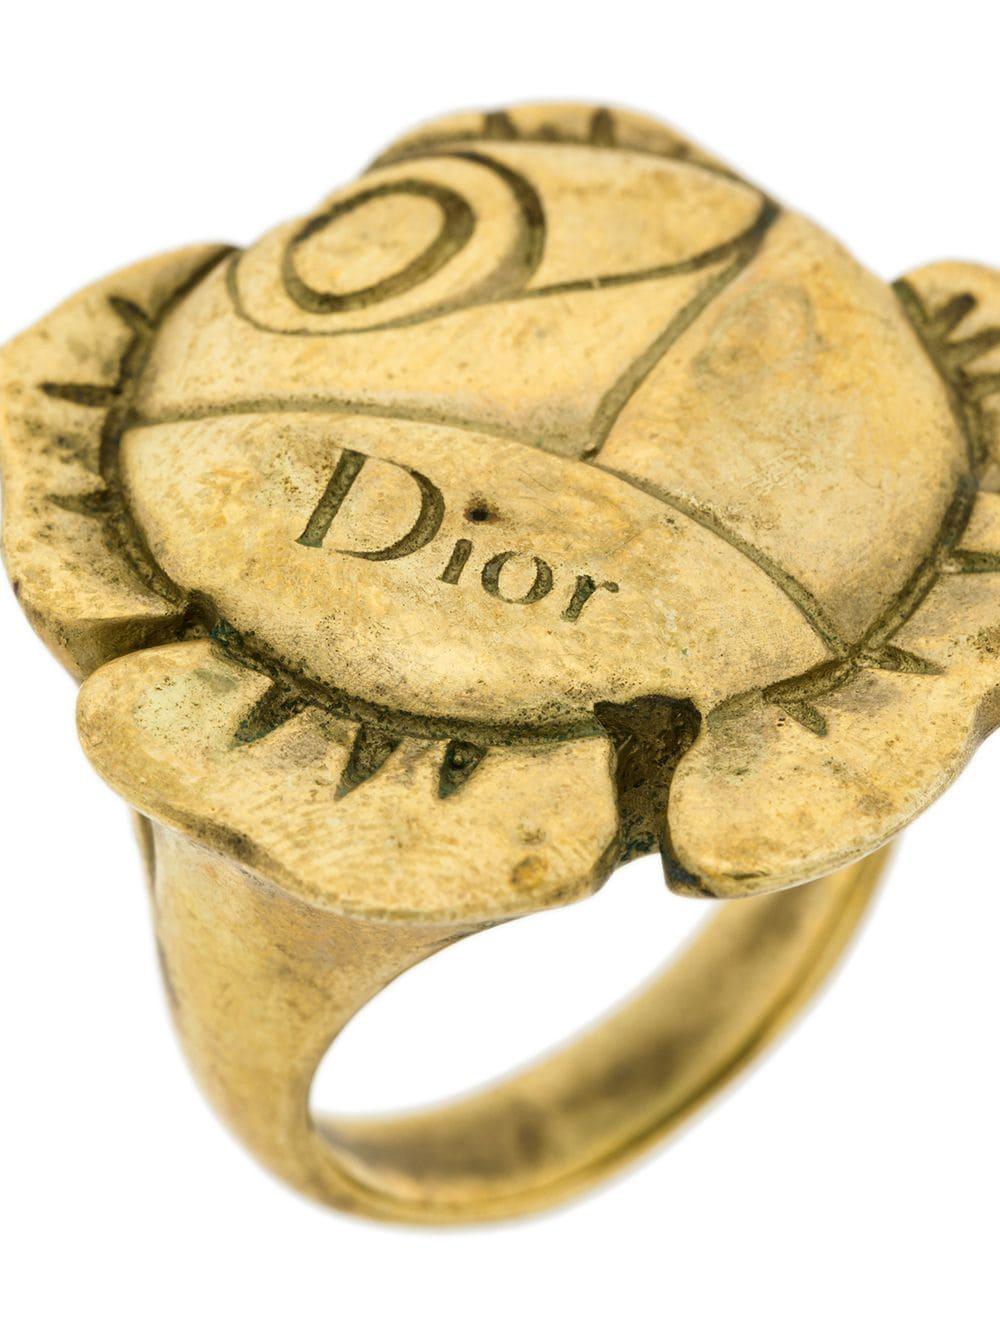 Christian Dior gold-tone metal flower ring featuring a flower shape and a Dior logo at the top. 
In good vintage condition  Made in France. 
Ring Size: 54 EU
Diameter: 2in. (5.5cm)
We guarantee you will receive this gorgeous item as described and